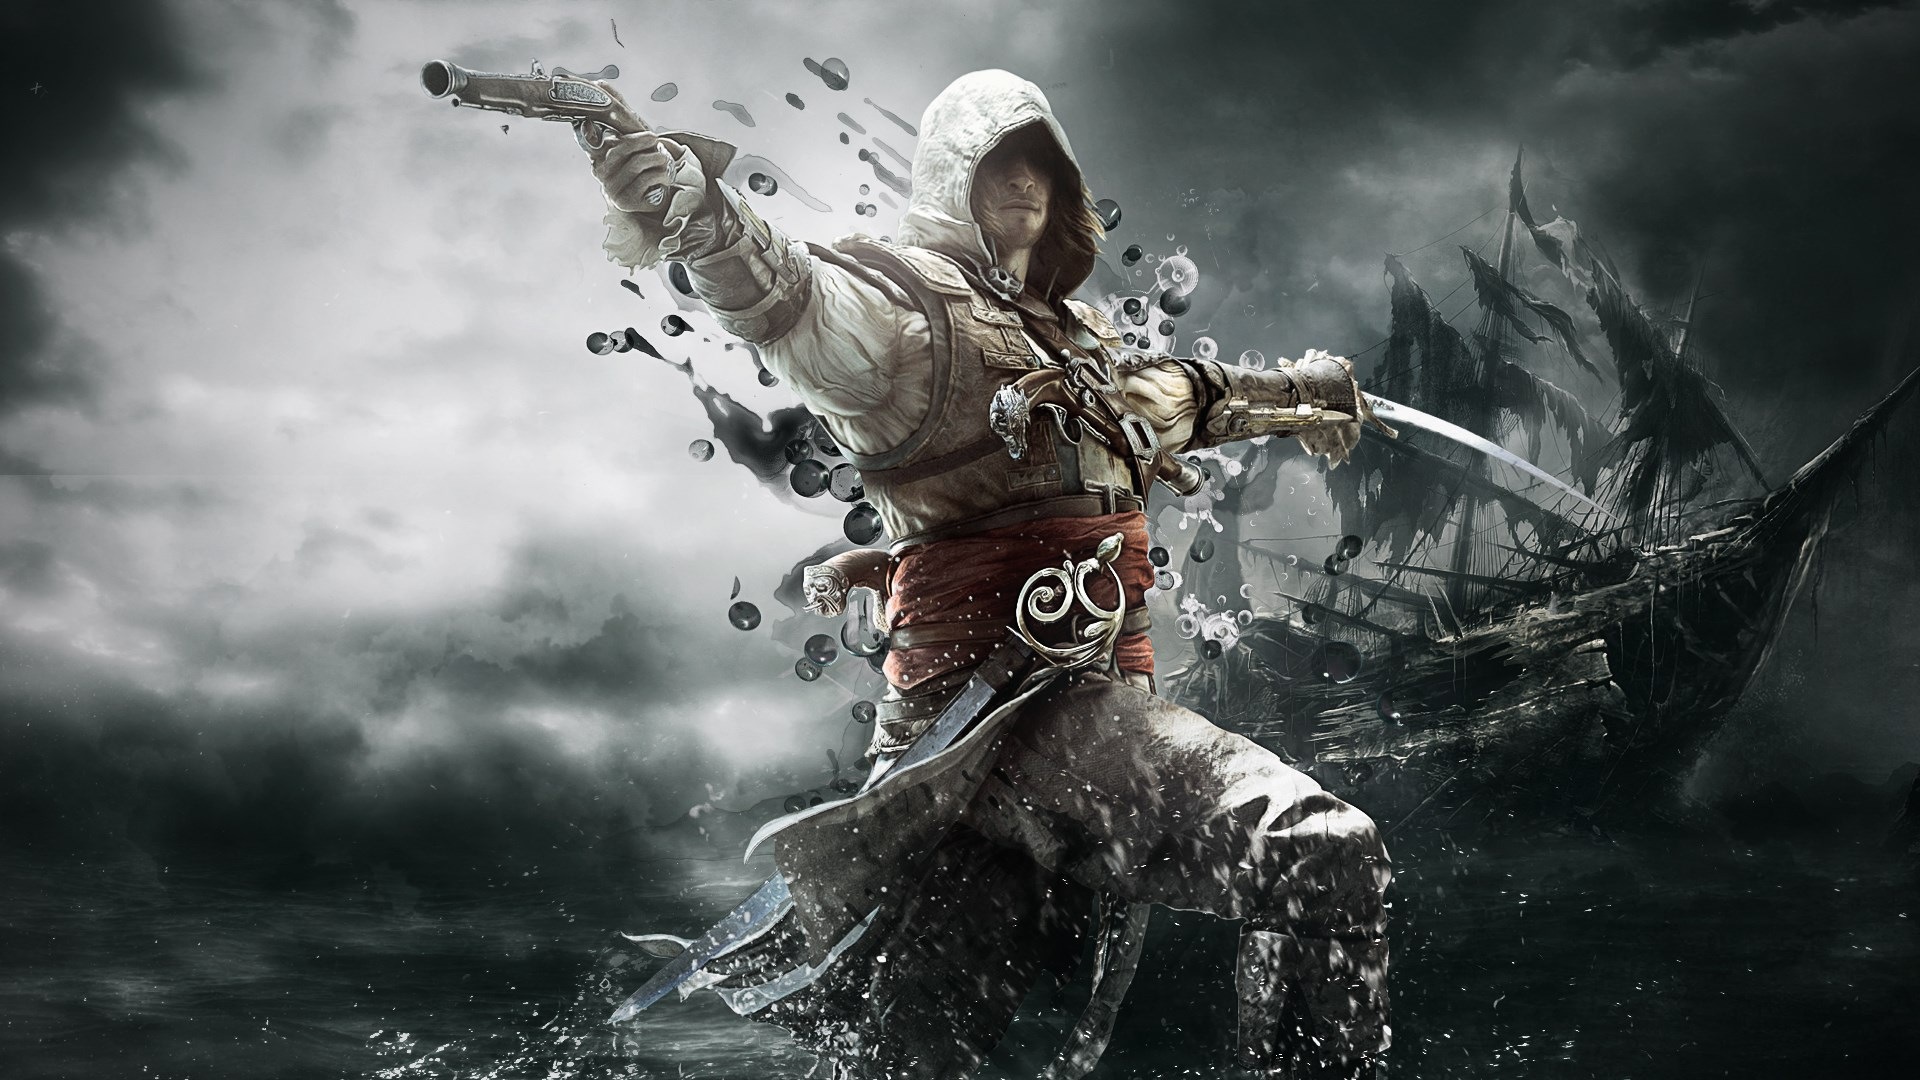 Creed IV Assassin: Black Flag HD wallpapers #8 - 1920x1080